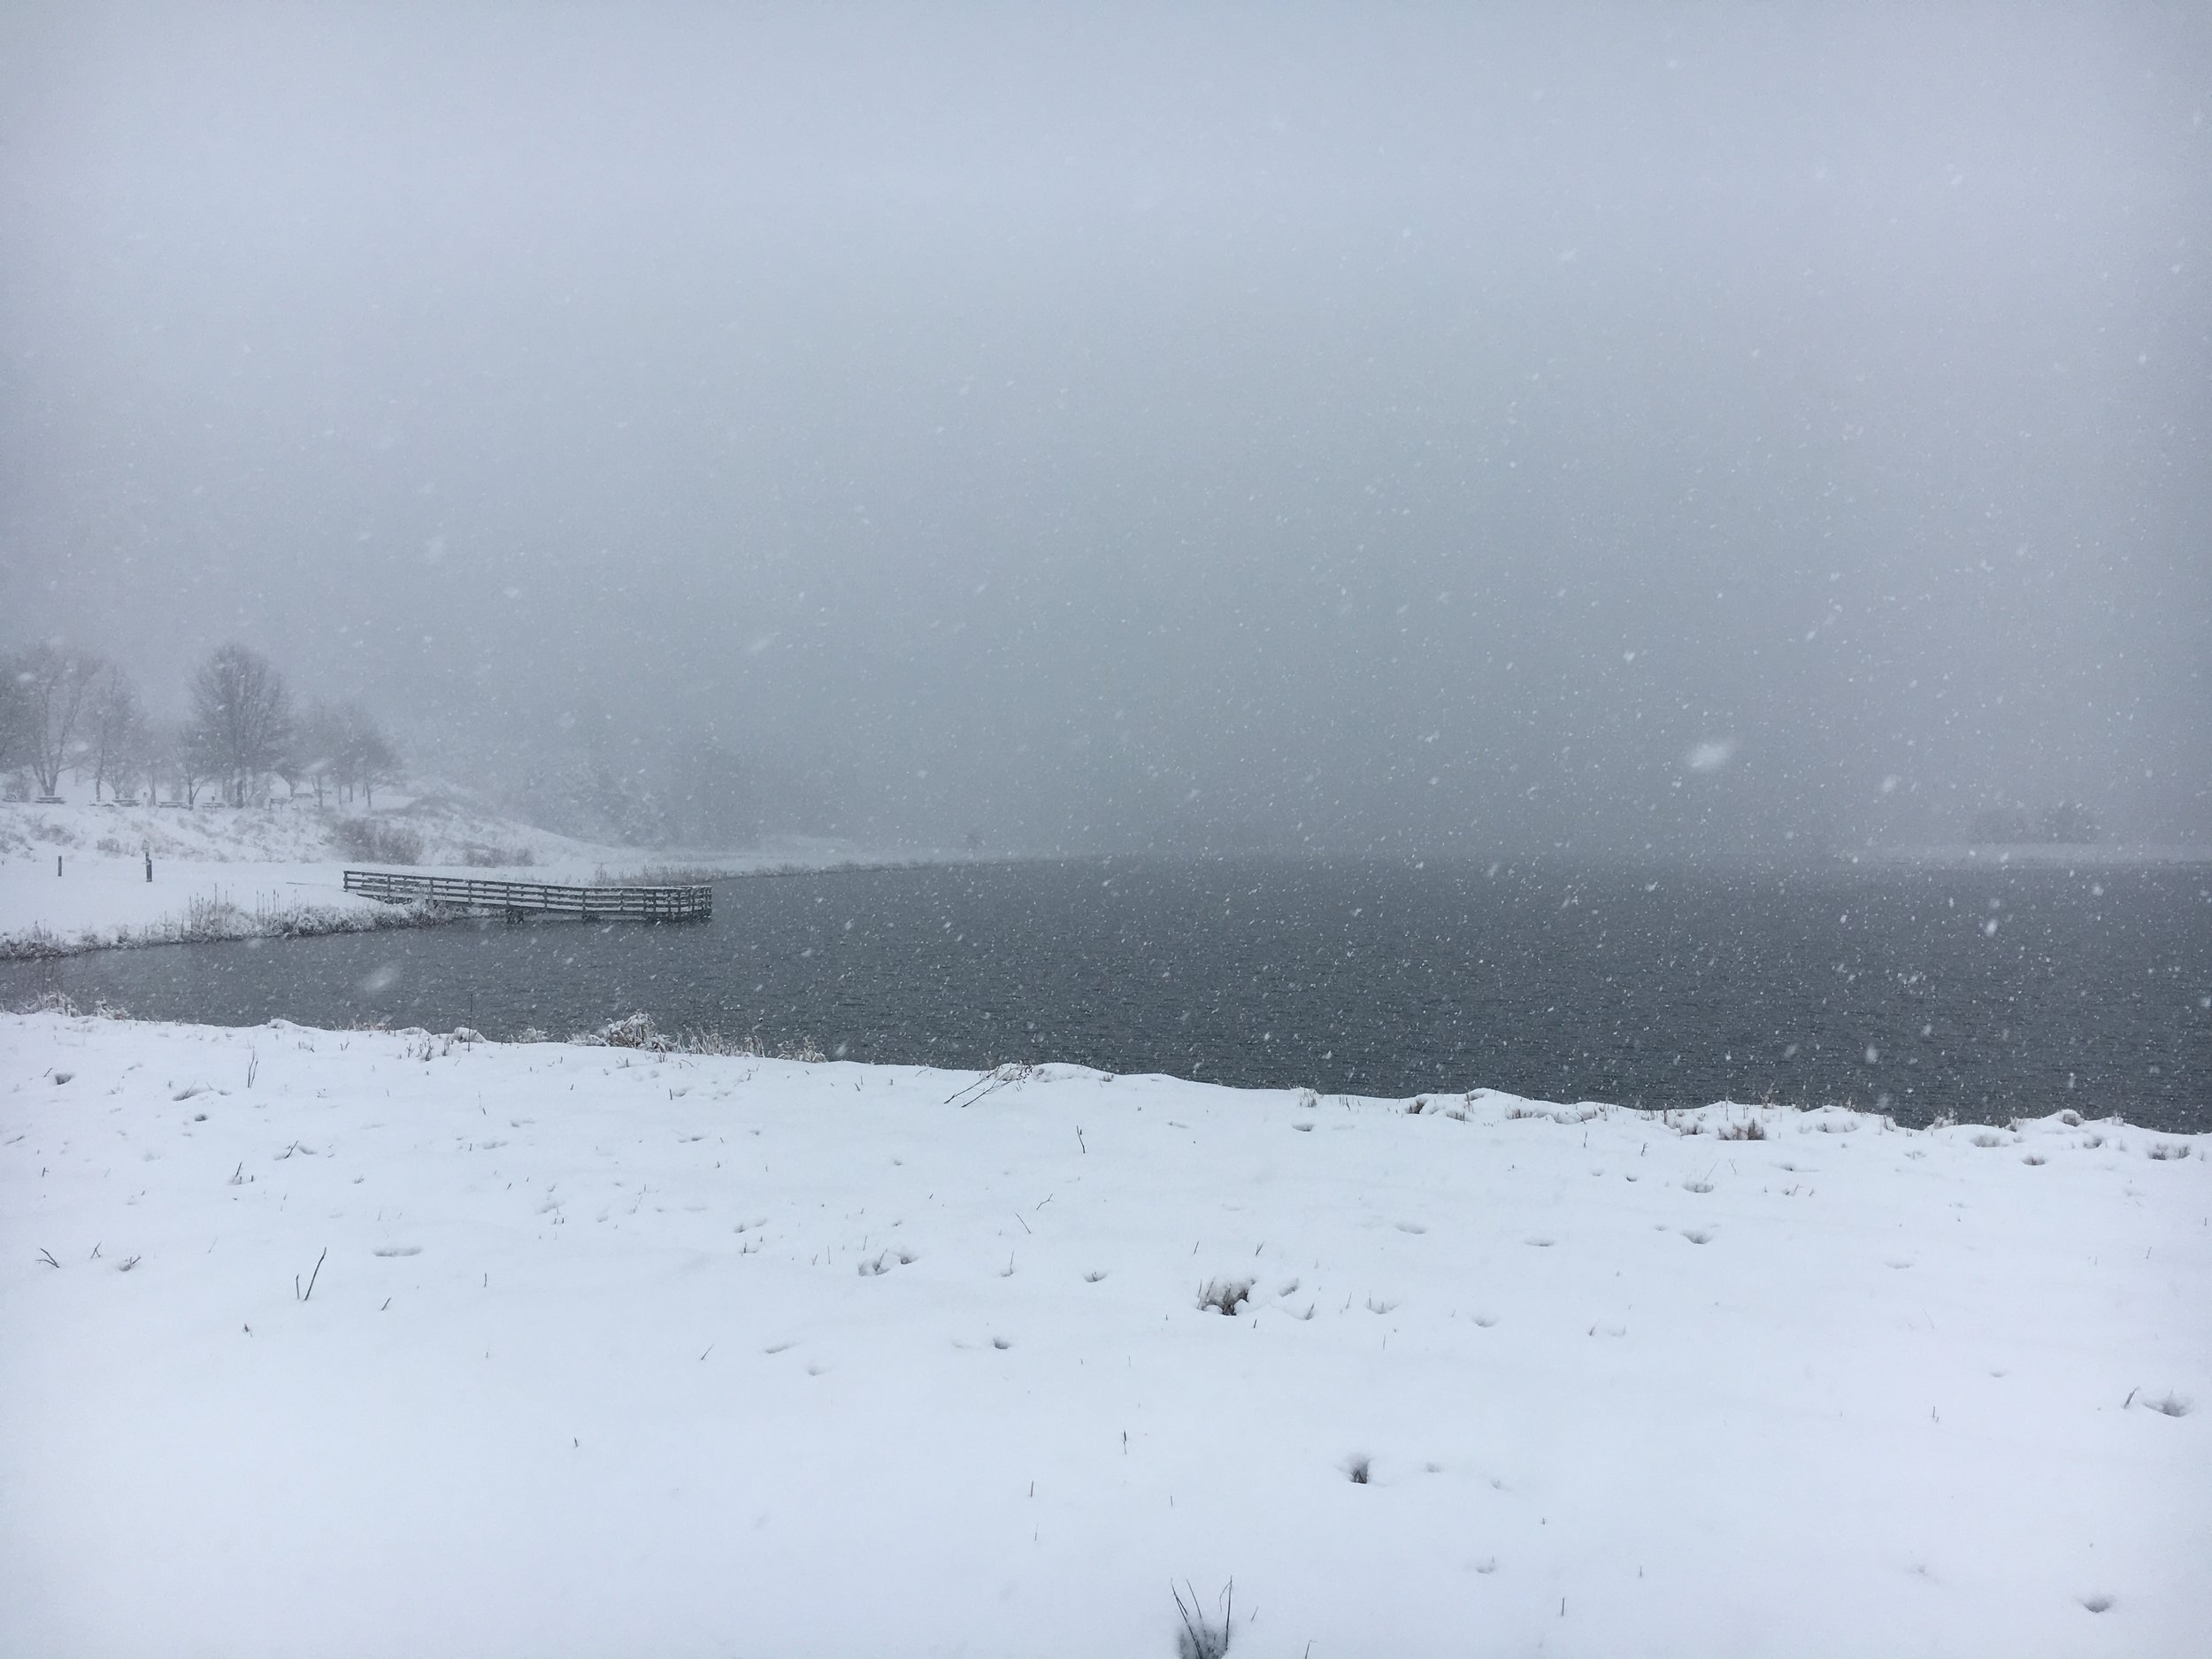  An early March snowstorm engulfs the northern lake 